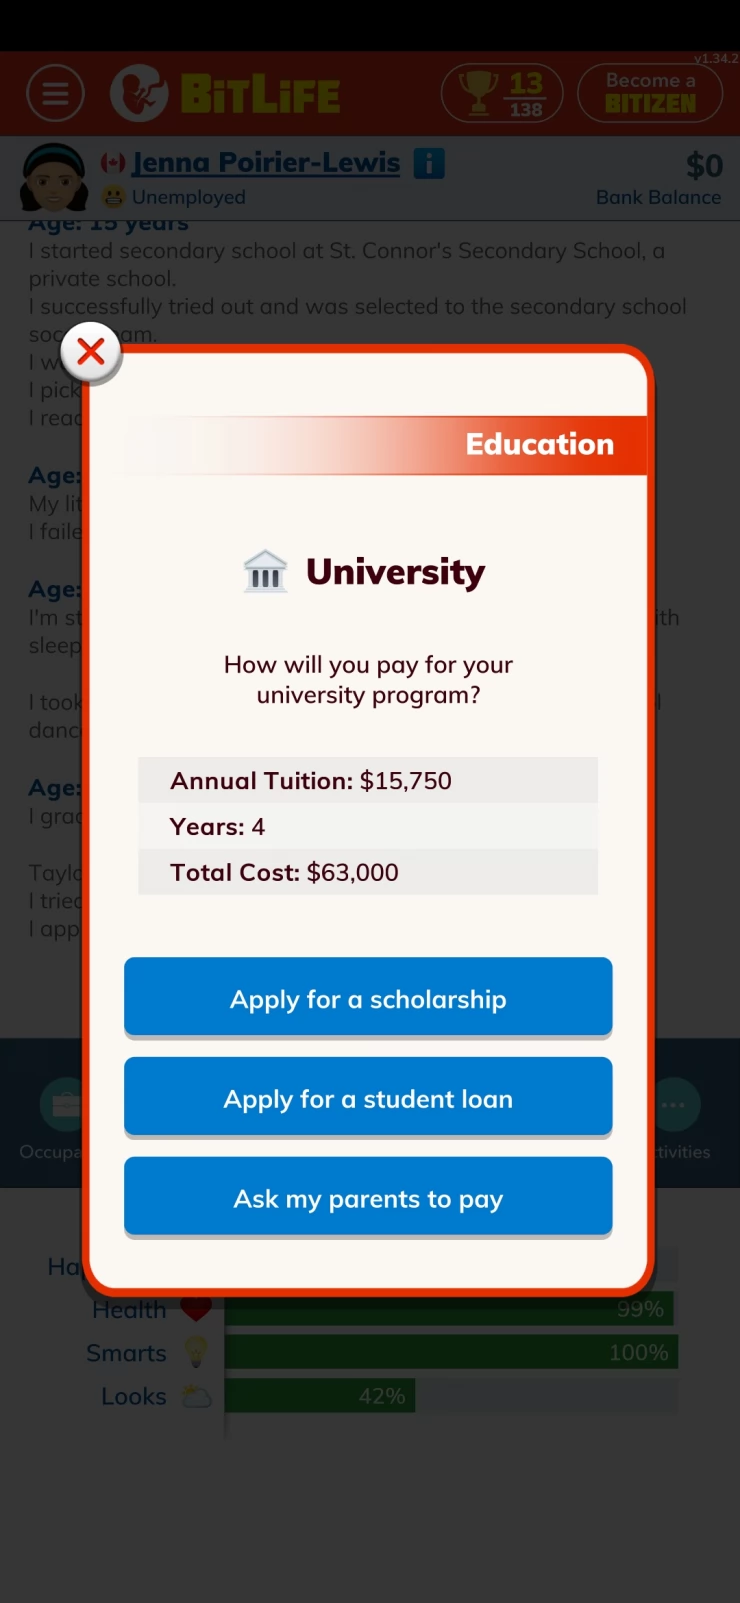 Apply for a Scholarship if your smarts are high